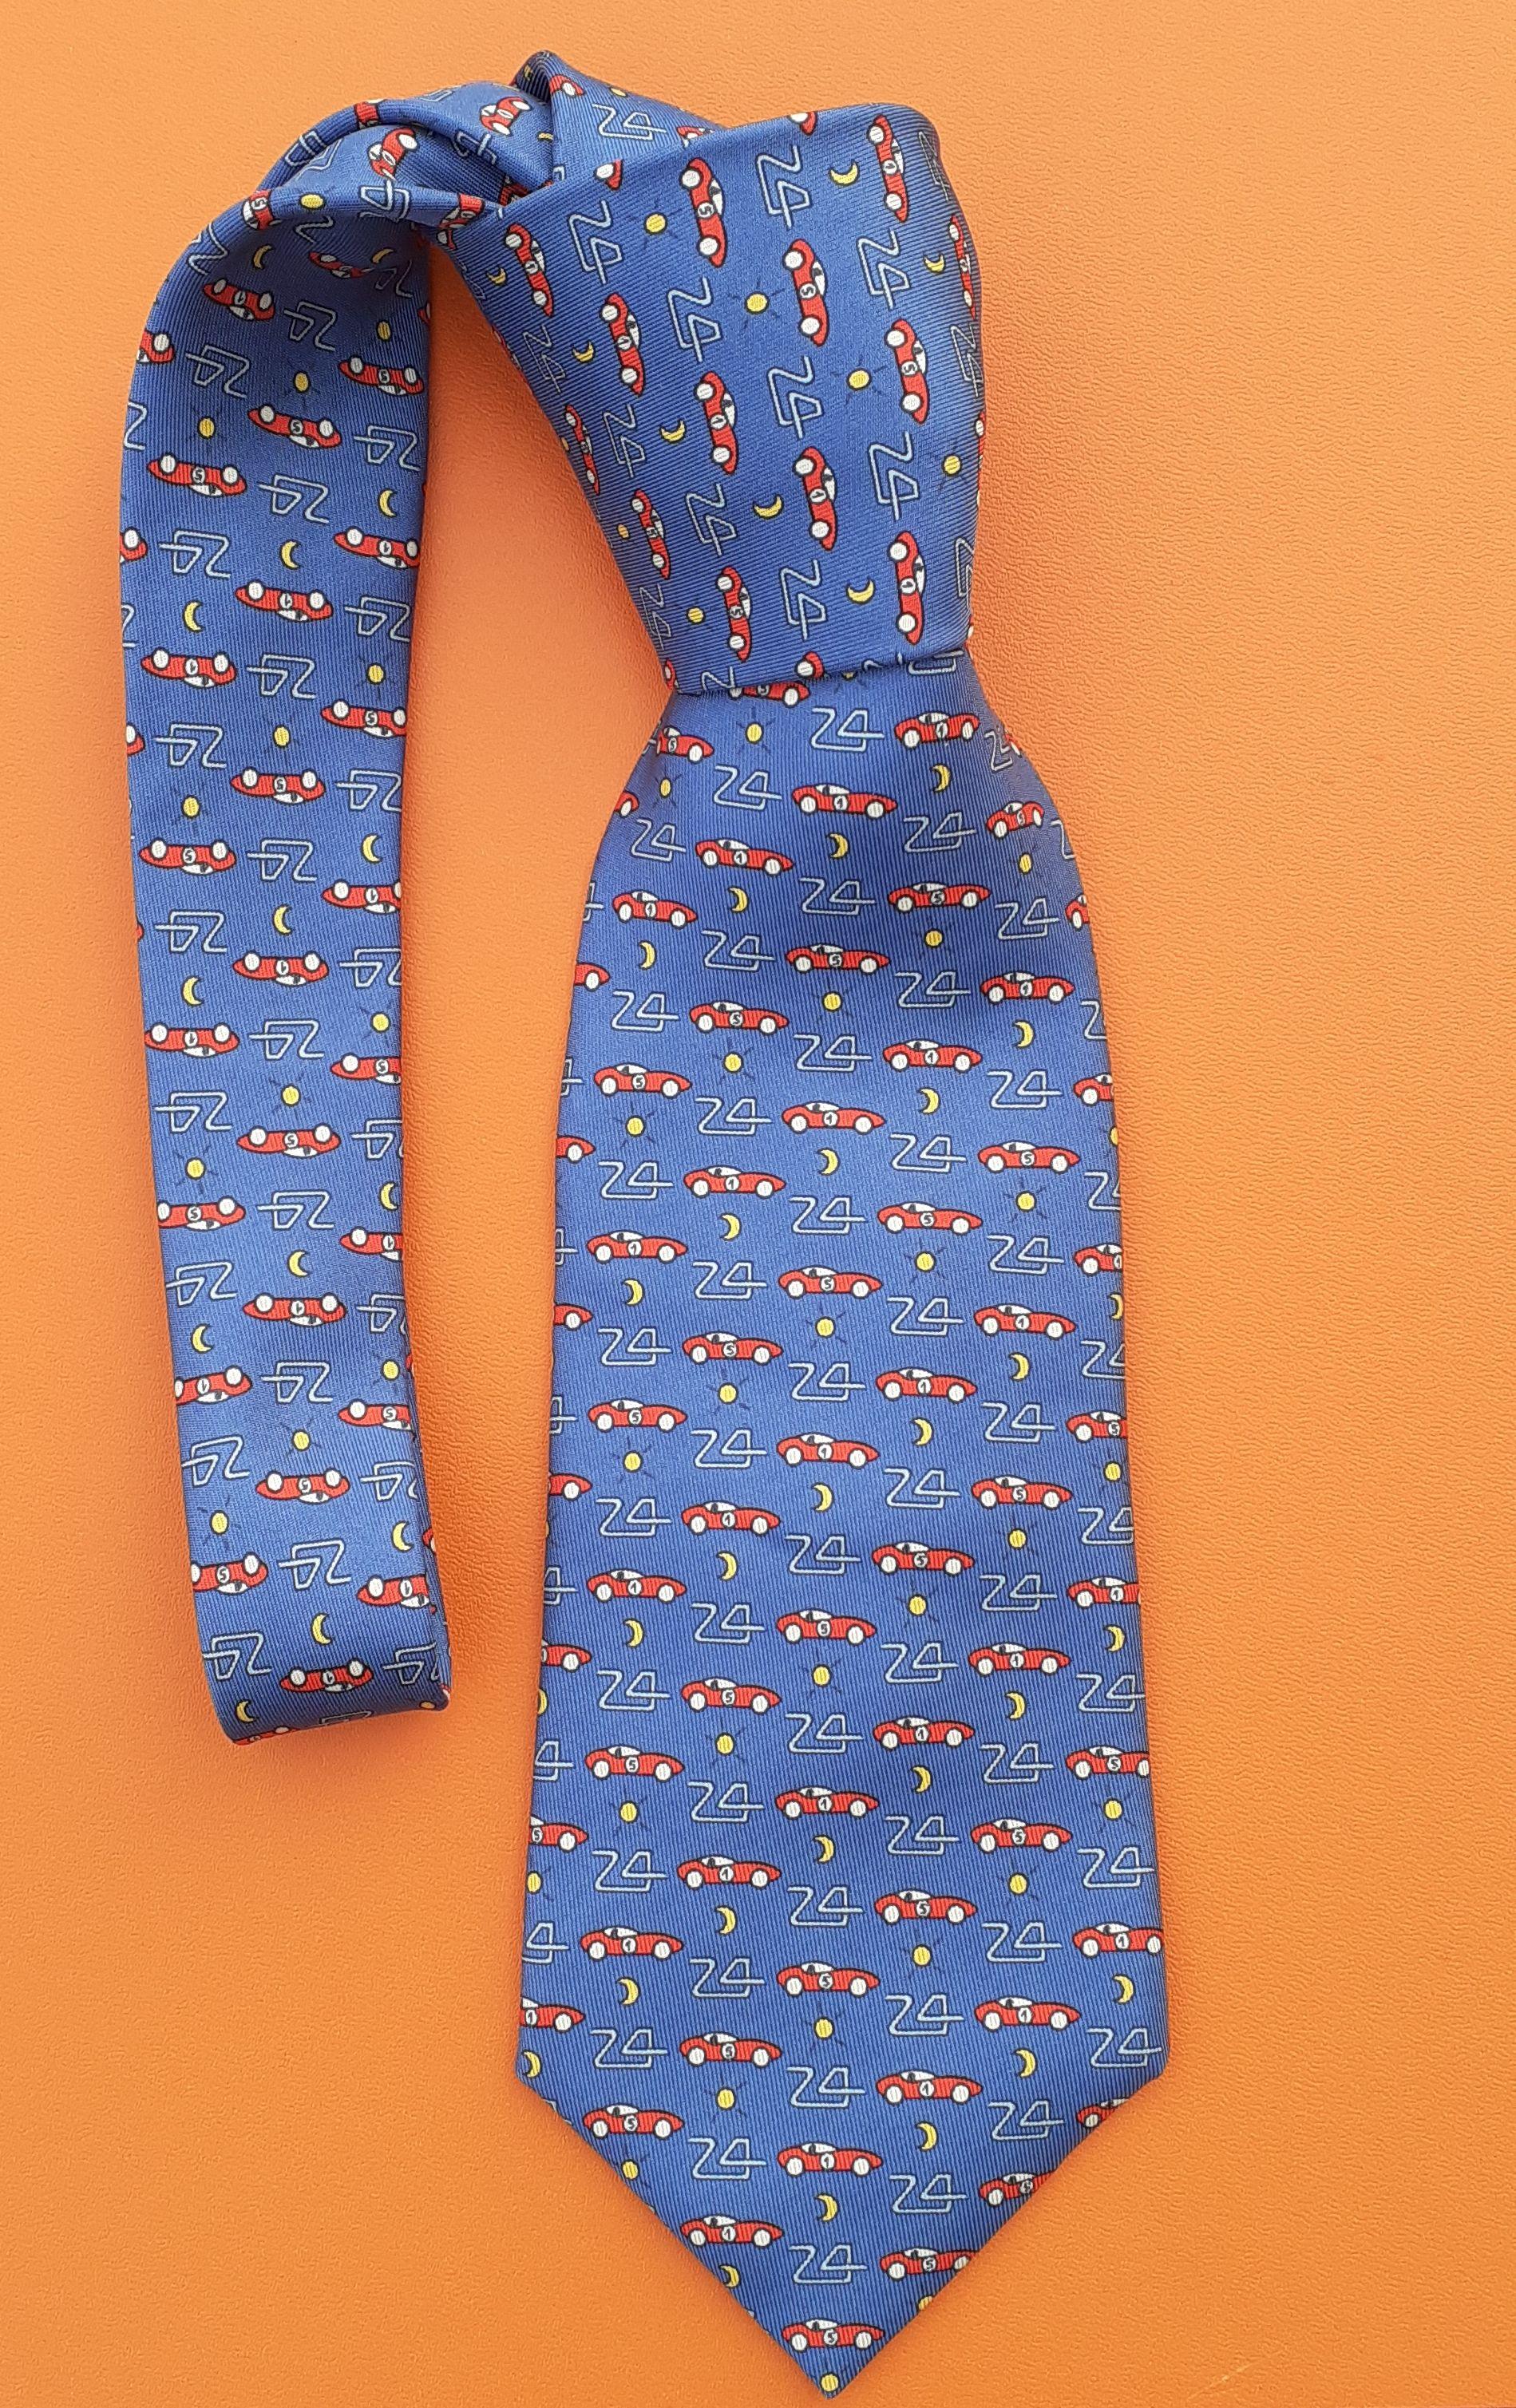 Rare and Lovely Authentic Hermès Tie

Made especially by HERMÈS for the 24 HEURES DU MANS race

Print: Racing cars and a road drawing the number 24

Made in France

Made of 100% Silk

Colorways: Blue, Red, White, Yellow

Lined with plain blue